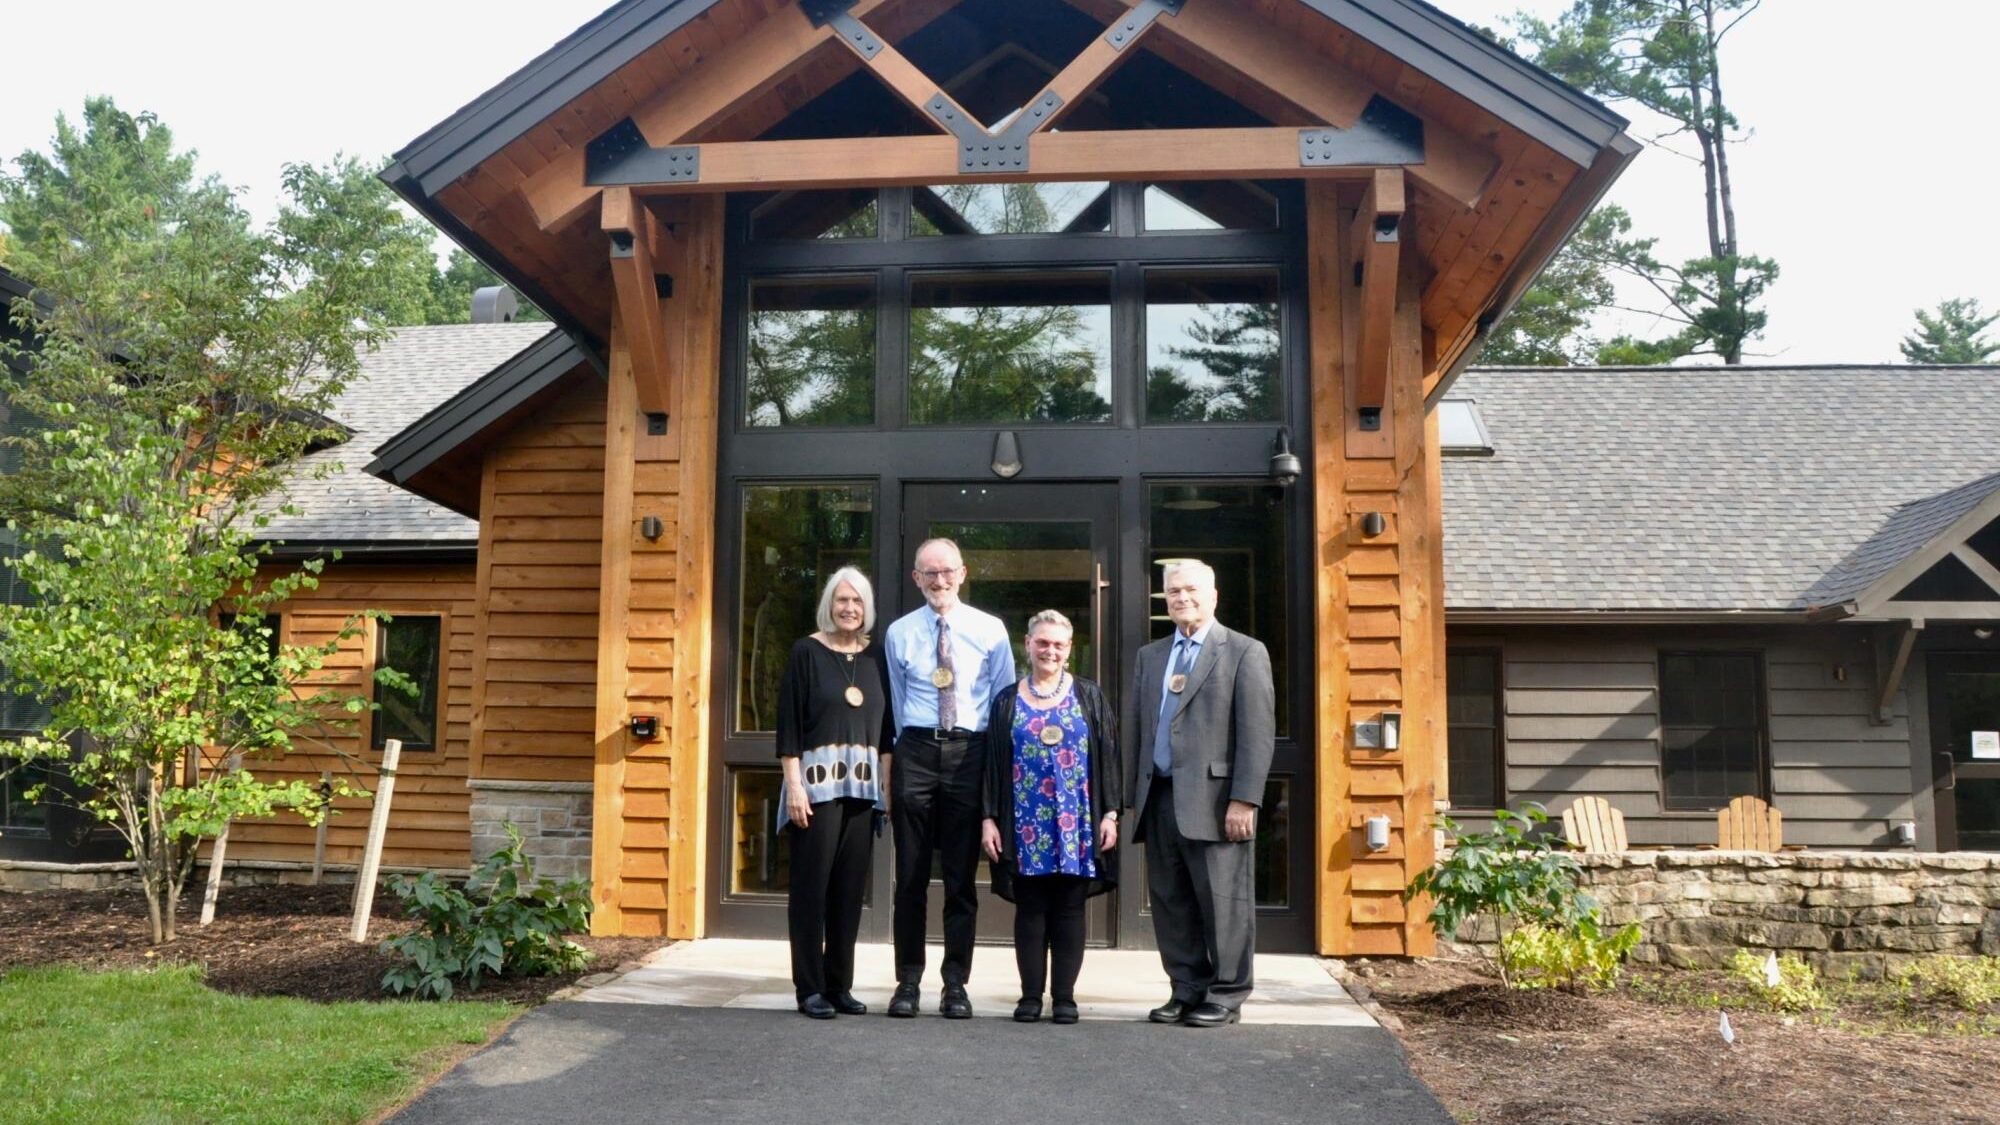 Mary Ellen and Tom Litzinger, Penn State President Eric Barron and his wife, Molly, in front of Shaver's Creek Environmental Center Photo Credit Trish Hummer